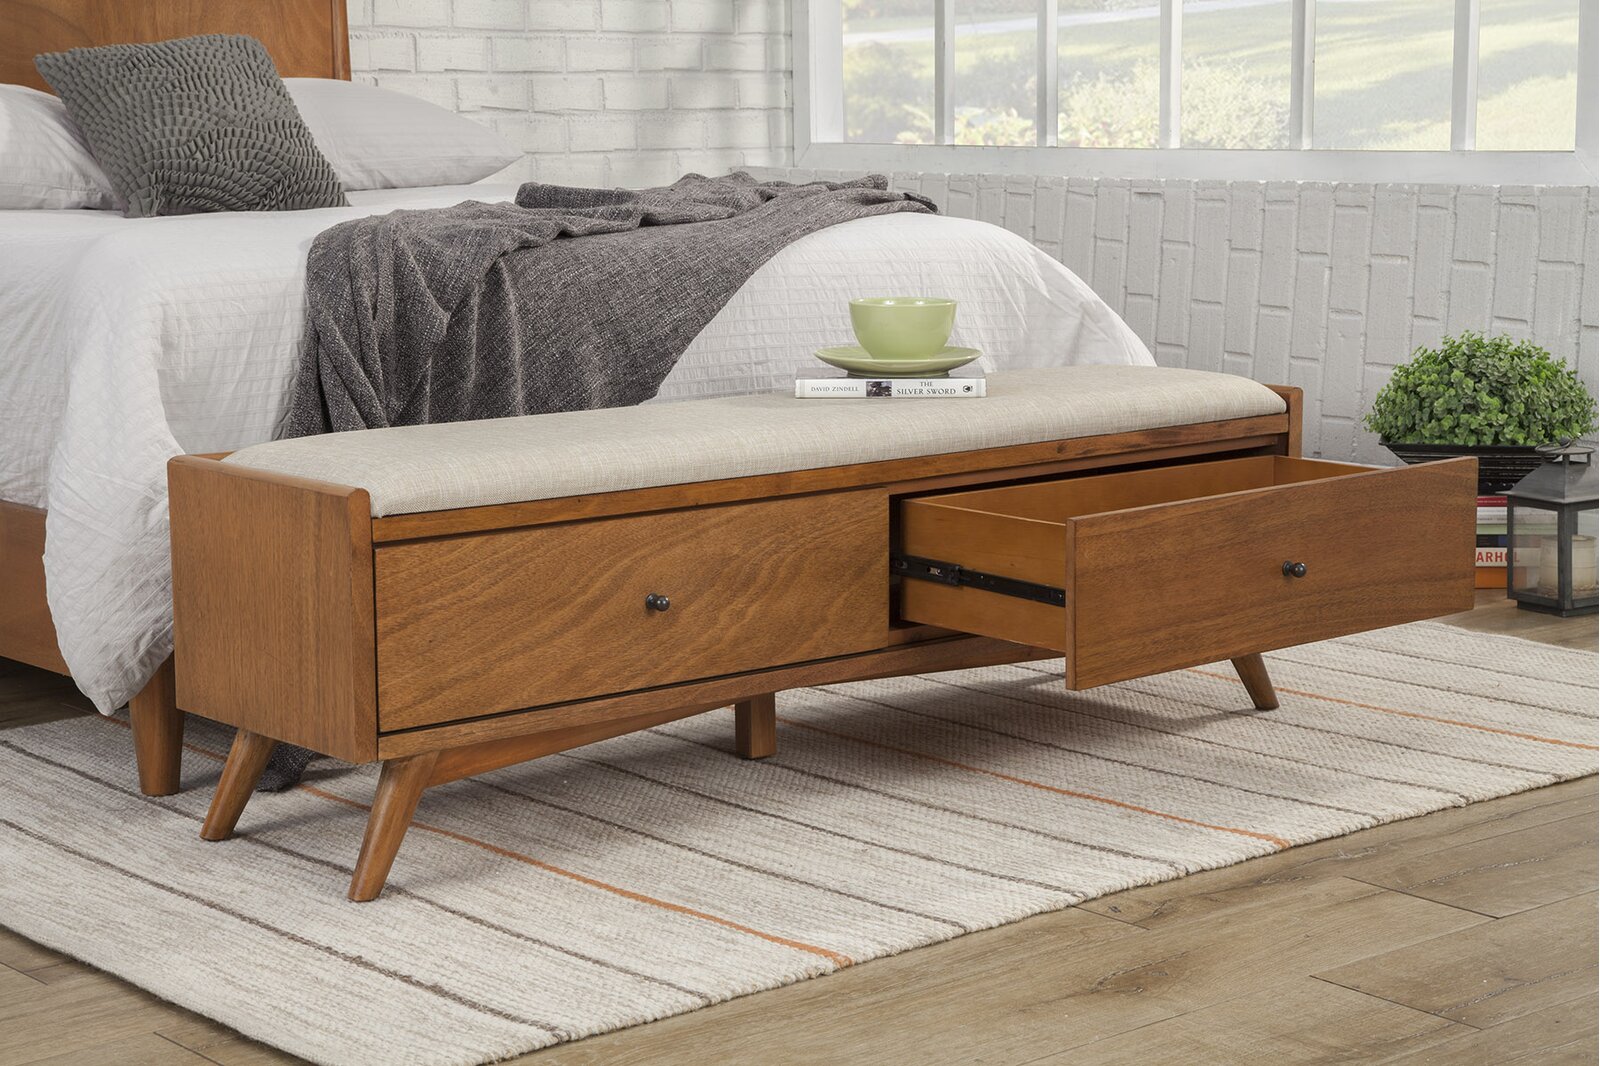 Essential Tips For Choosing The Best Bedroom Storage Bench